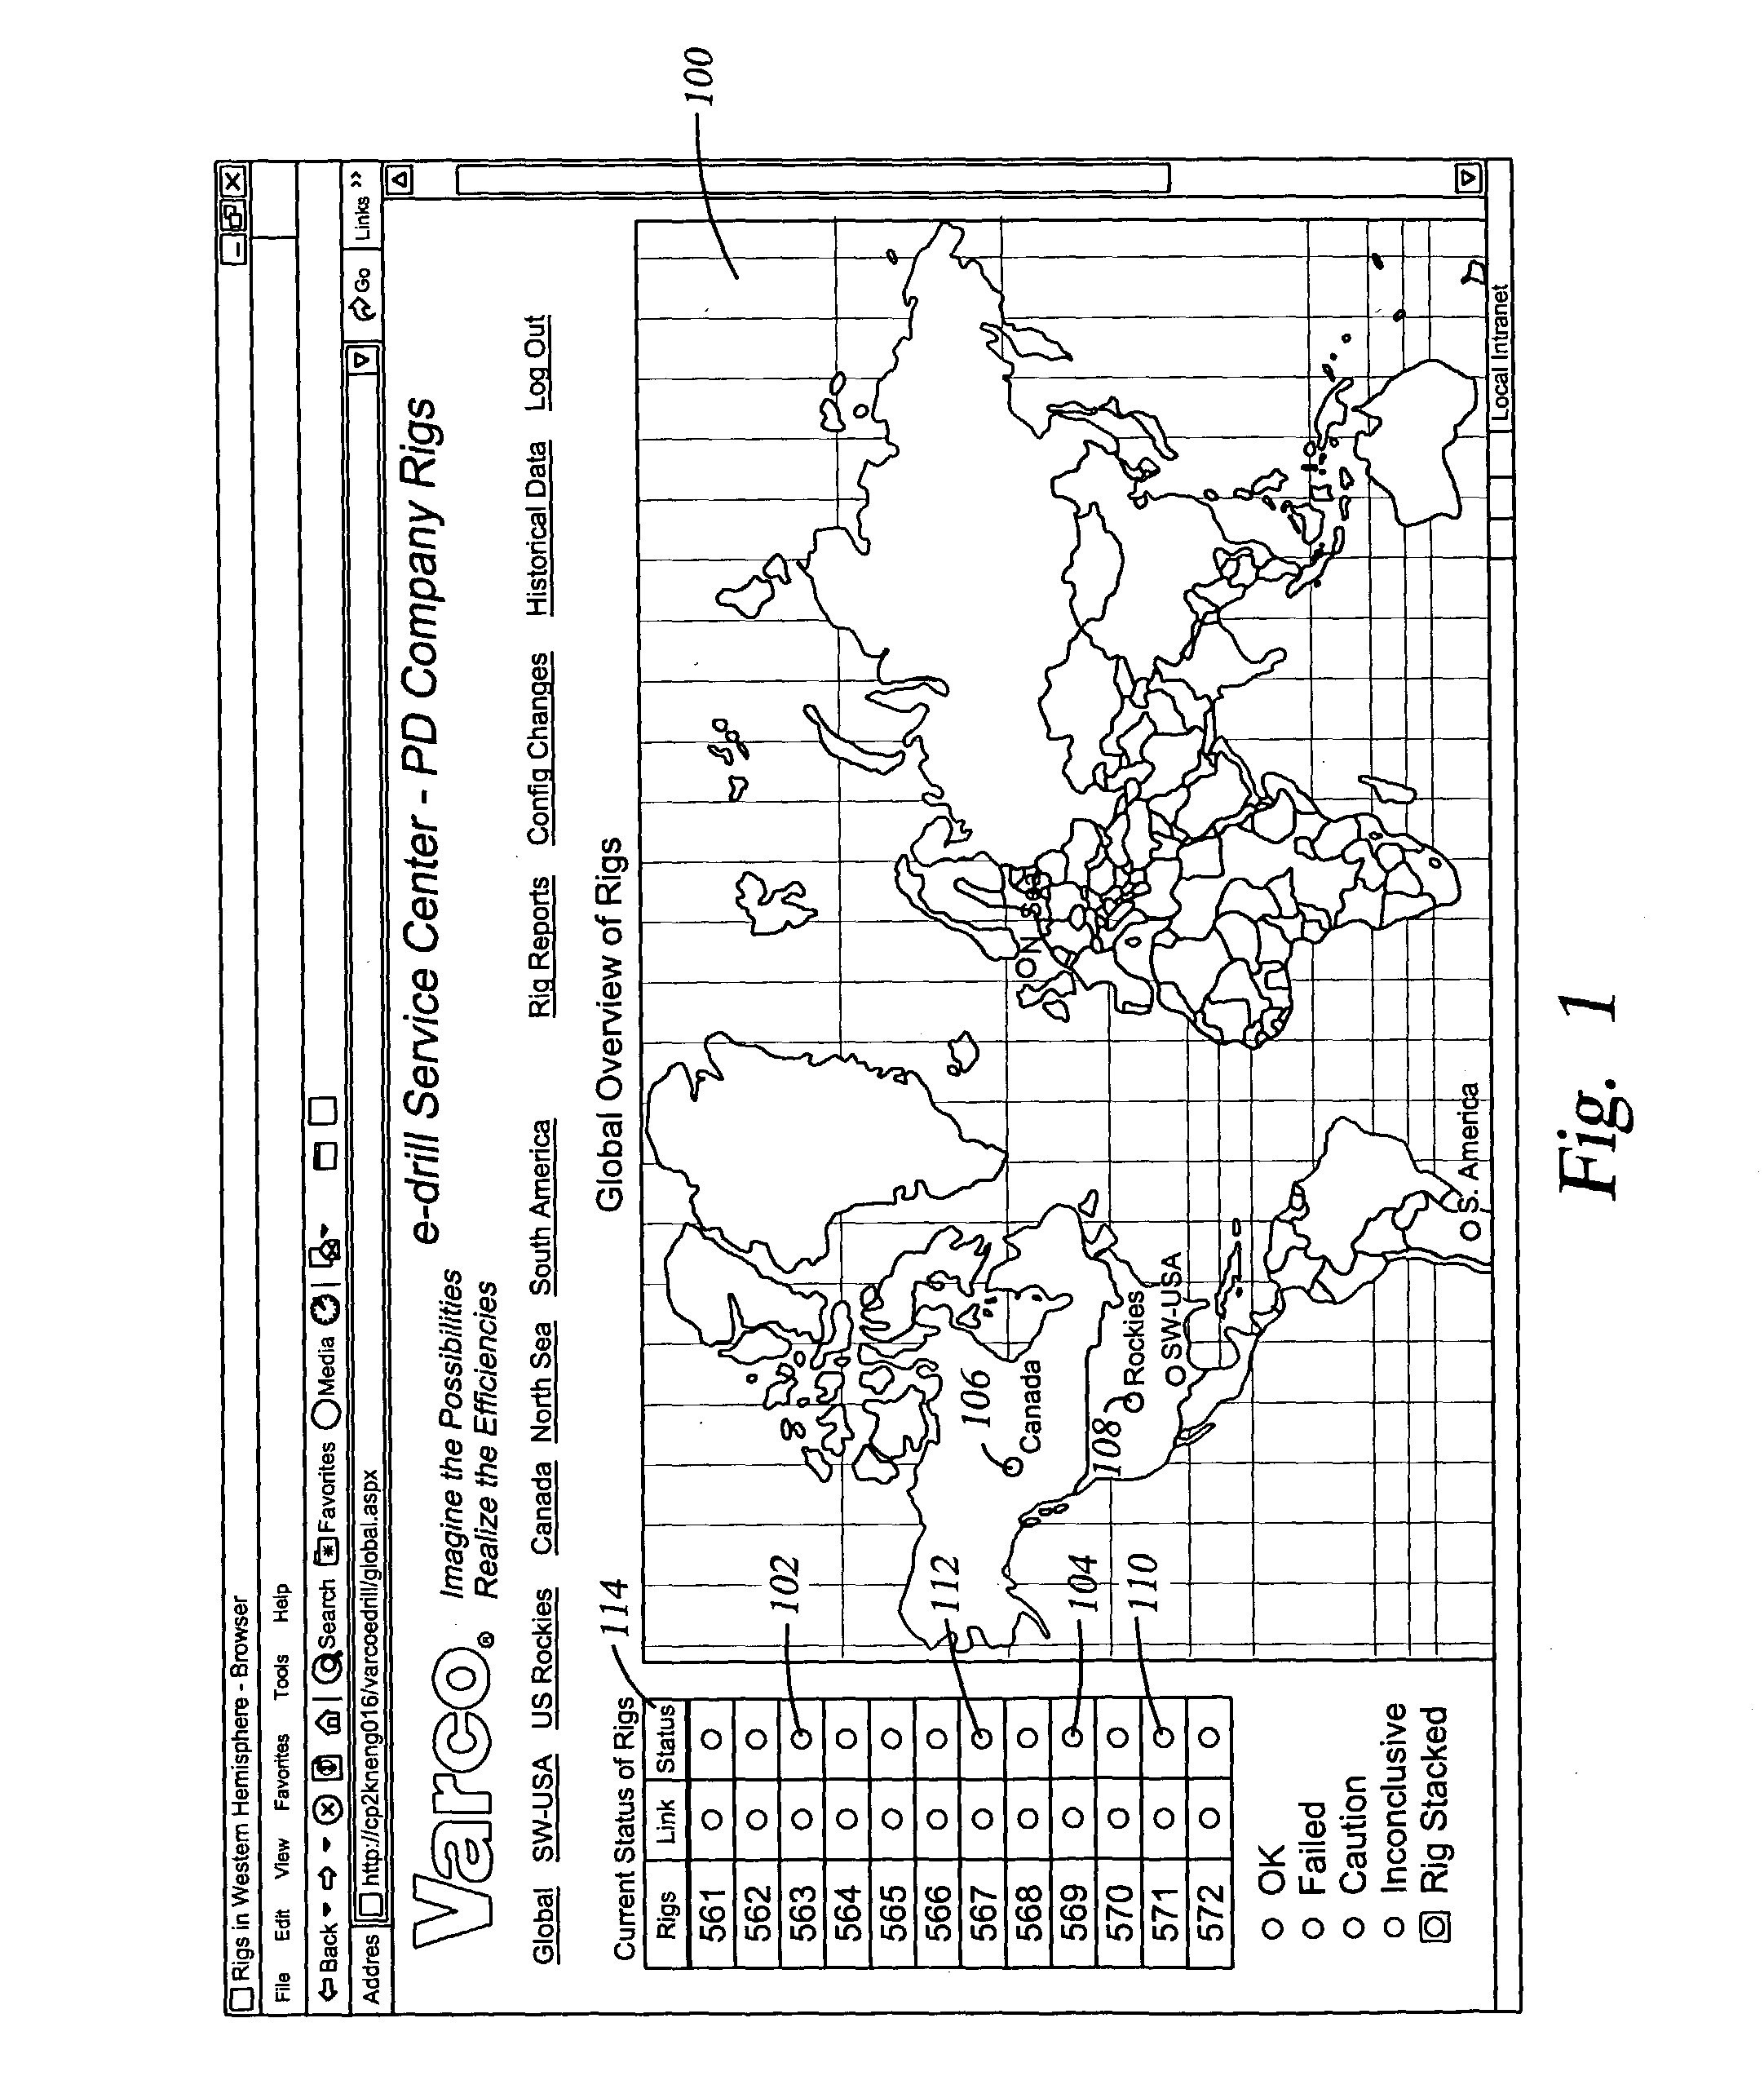 Method and apparatus for dynamic checking and reporting system health